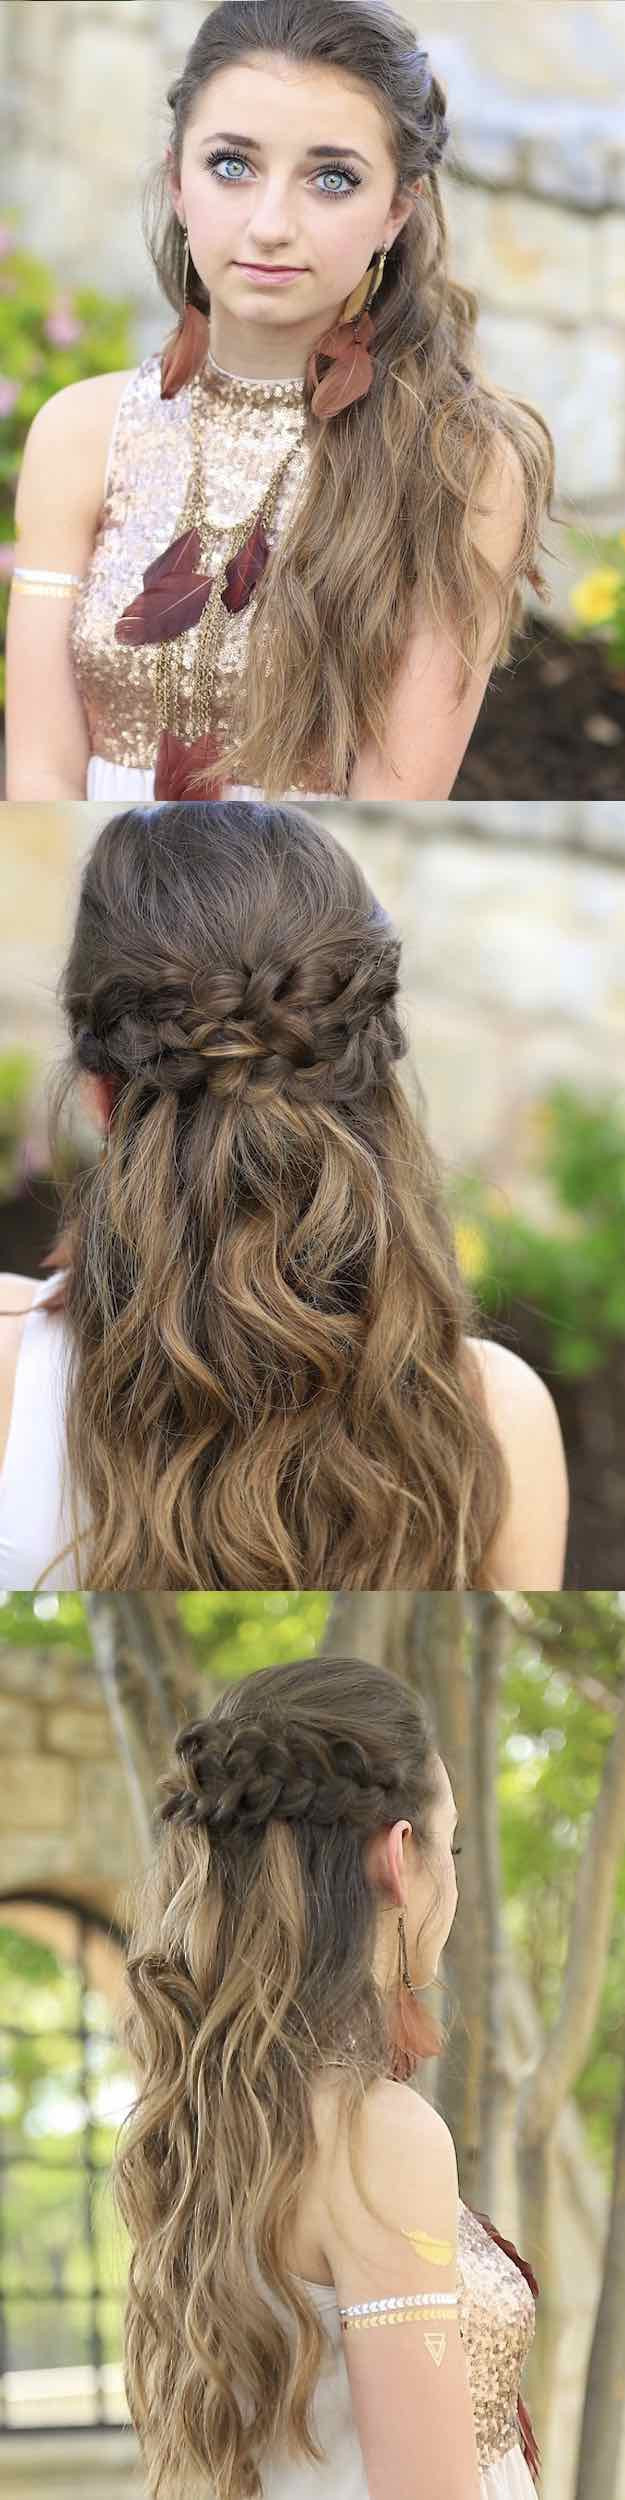 Hair Down Prom Hairstyles
 25 Easy Half Up Half Down Hairstyle Tutorials For Prom